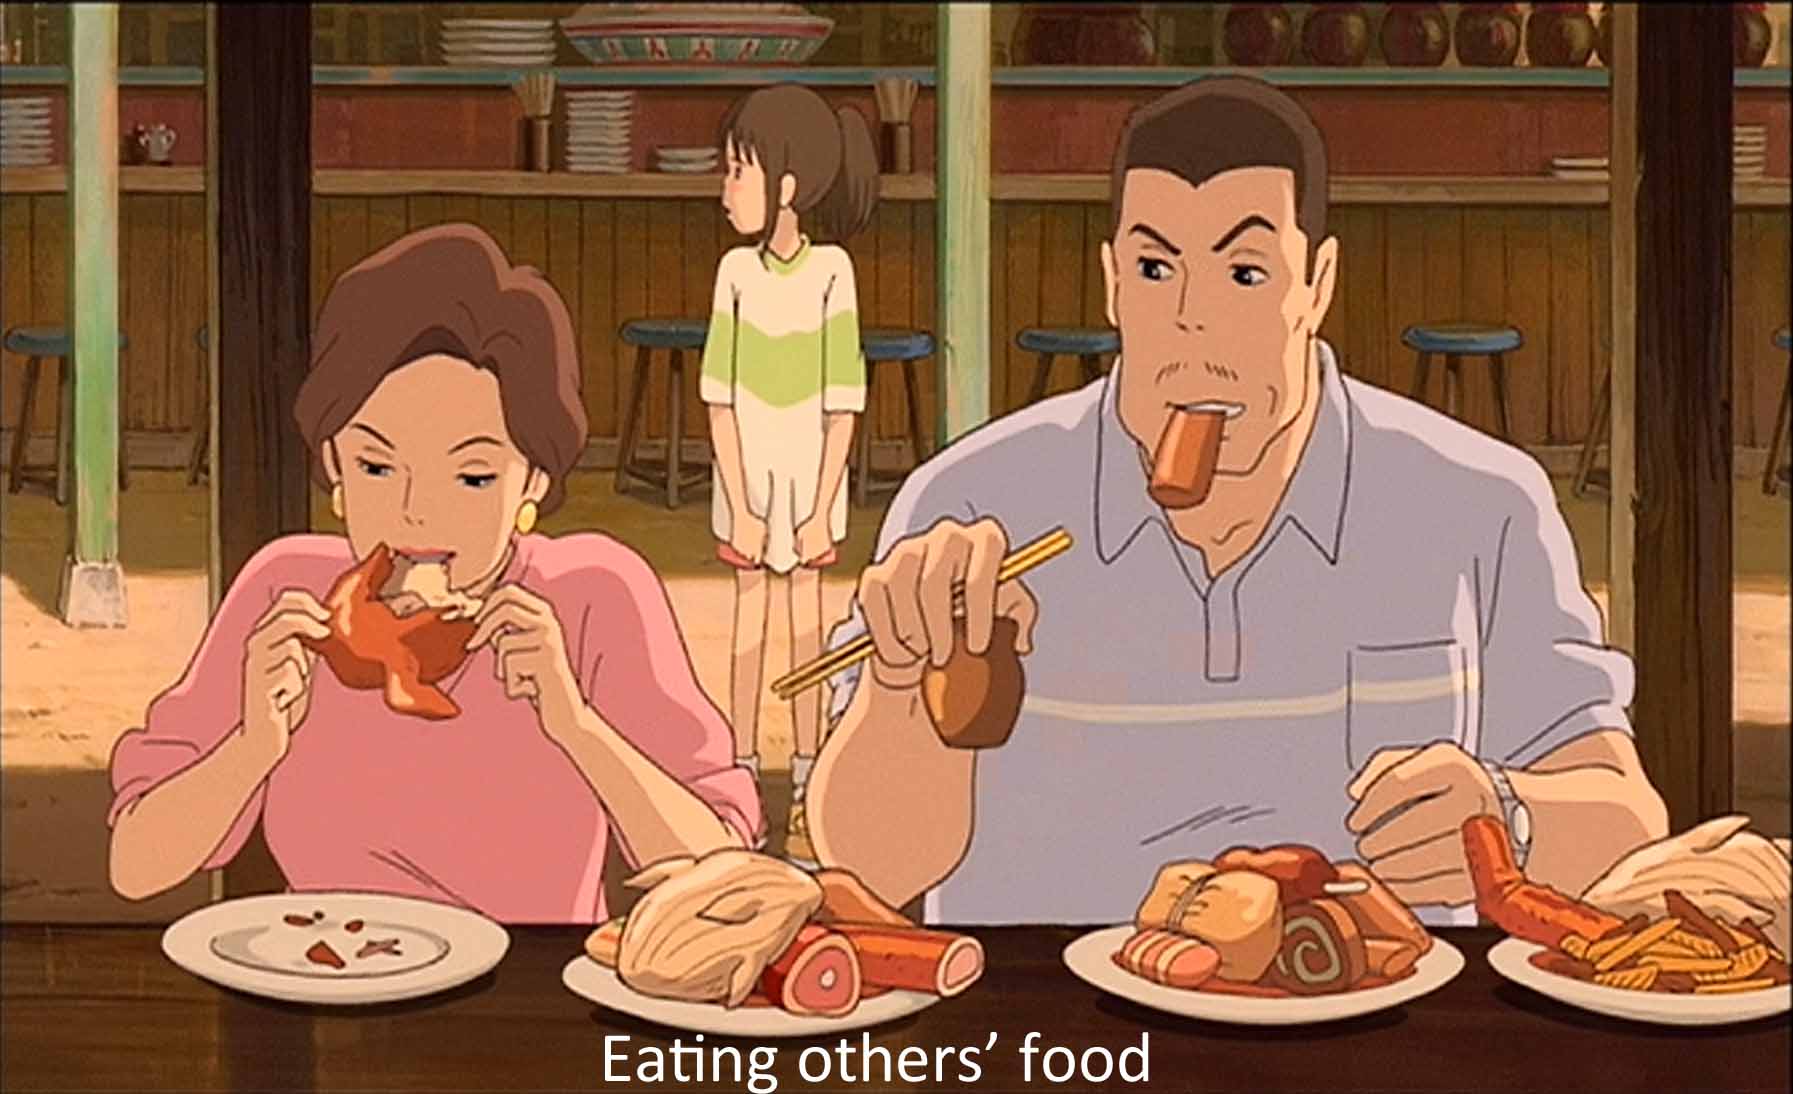 Eating others' food